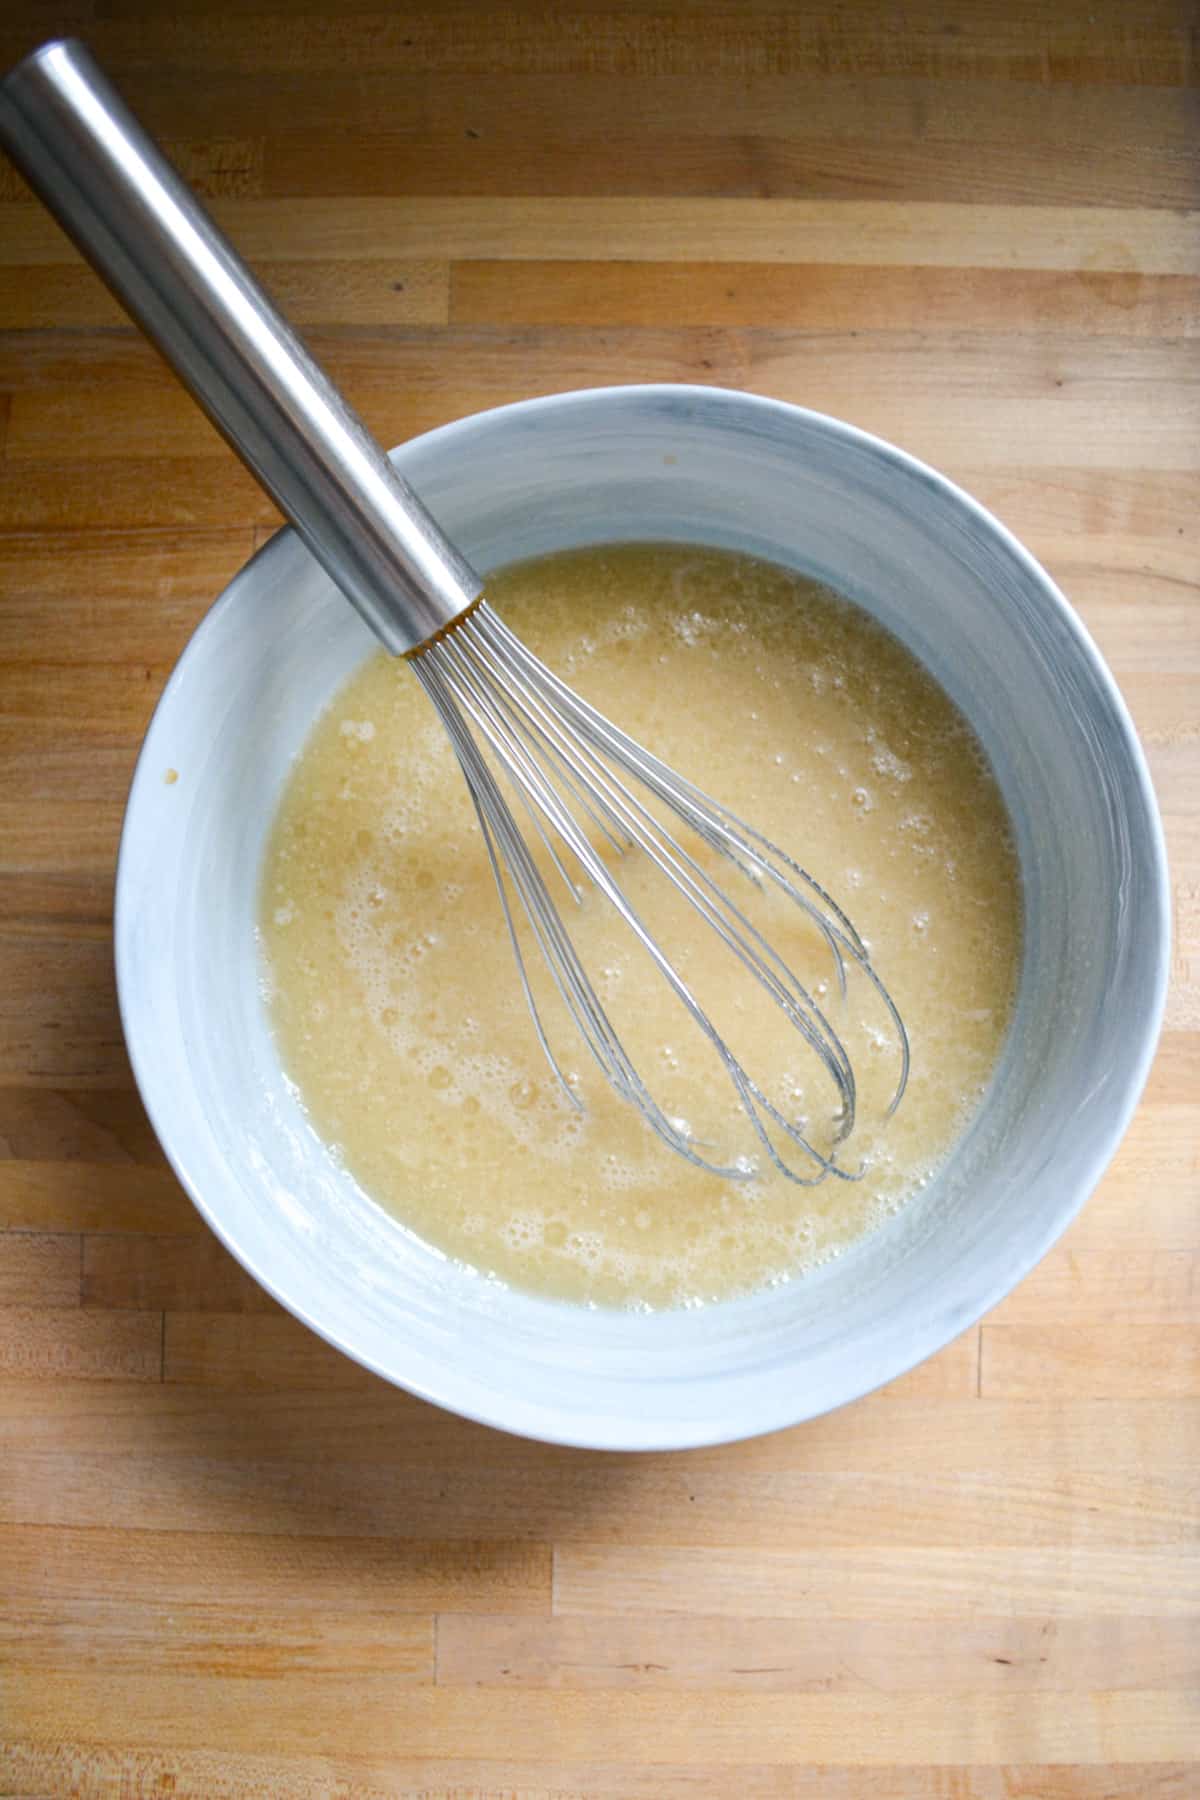 Wet ingredients in a mixing bowl with a metal whisk in the bowl.